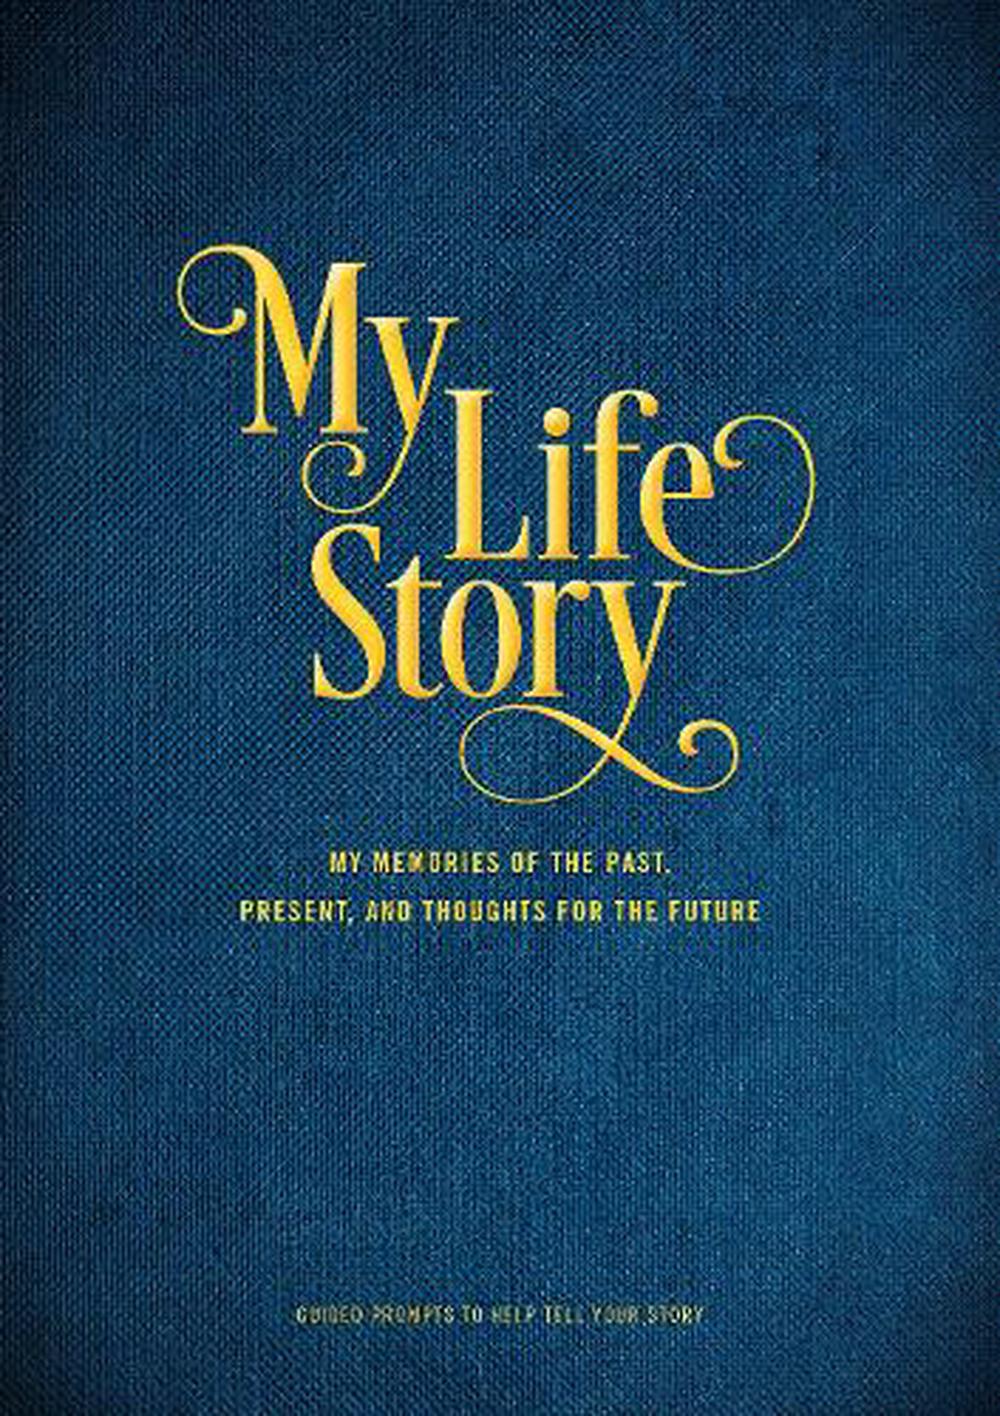 my-life-story-by-editors-of-chartwell-books-paperback-9780785839118